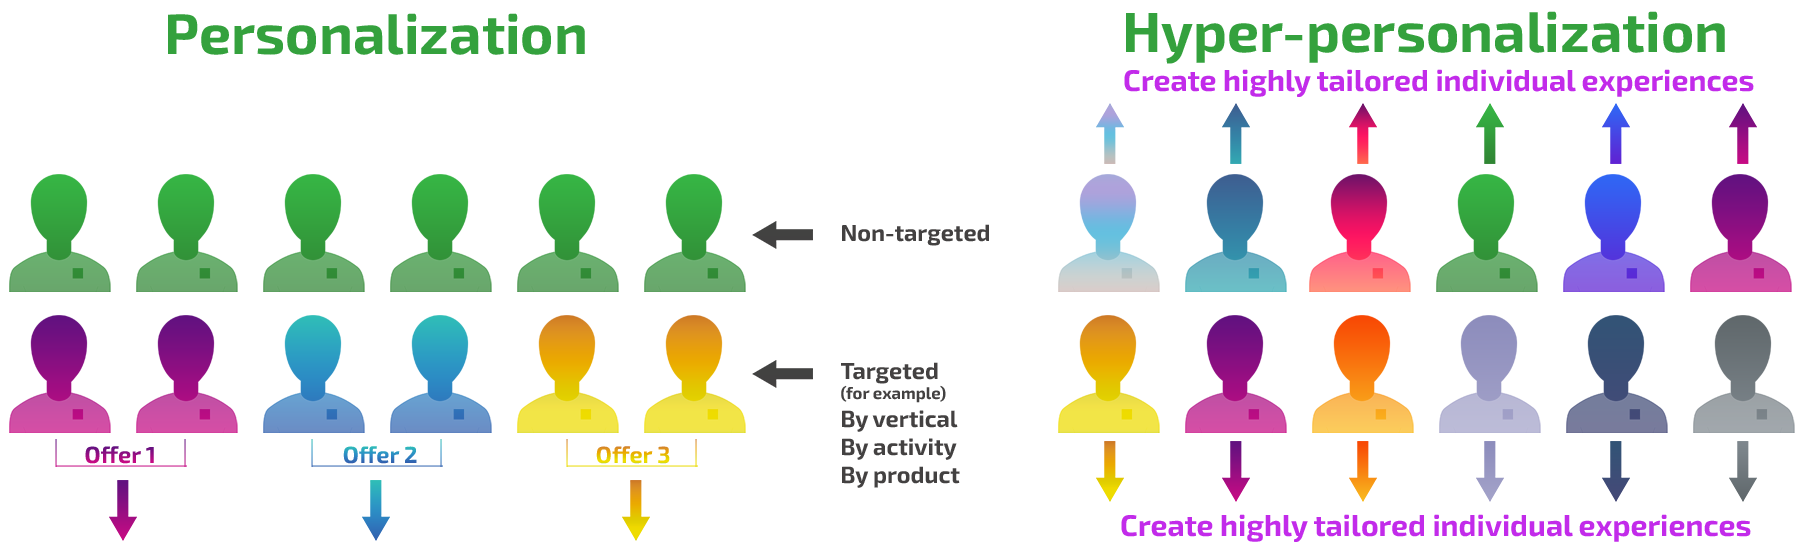 What is hyper-personalization?